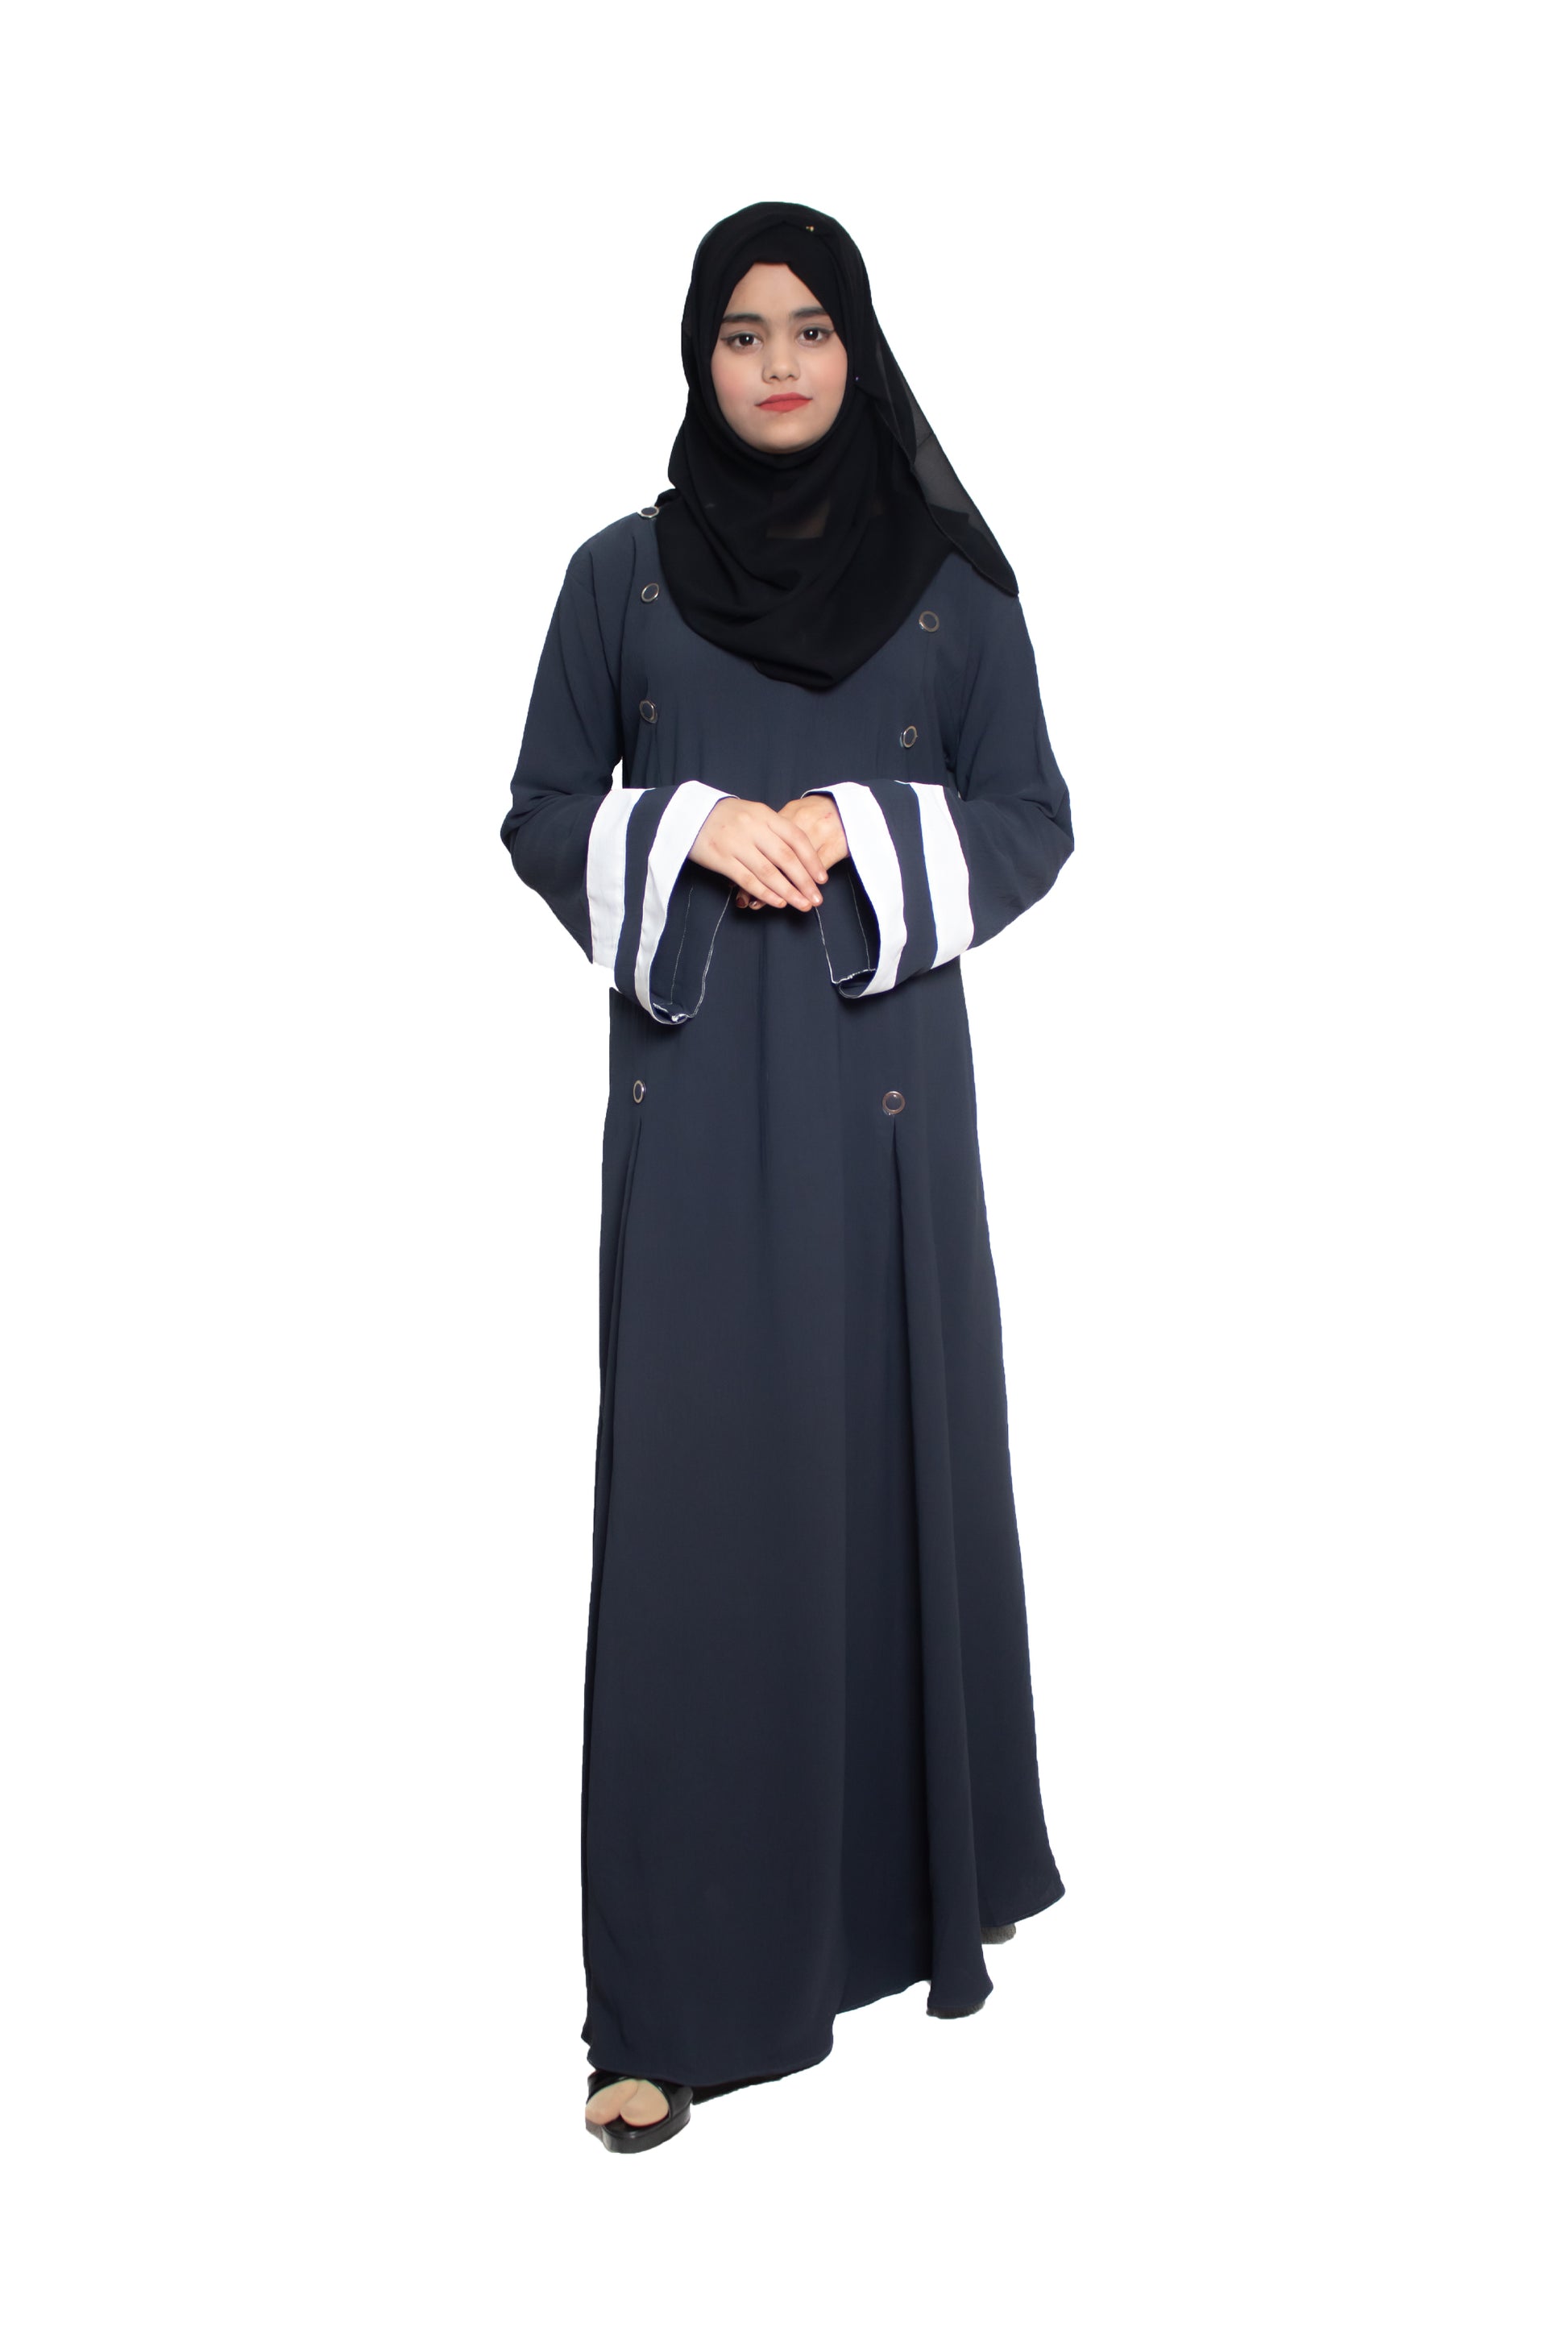 Modest City Self Design Plain Dark Grey Front Button with Beige Cuff Abaya or Burqa With Hijab for Women & Girls-Series Laiba